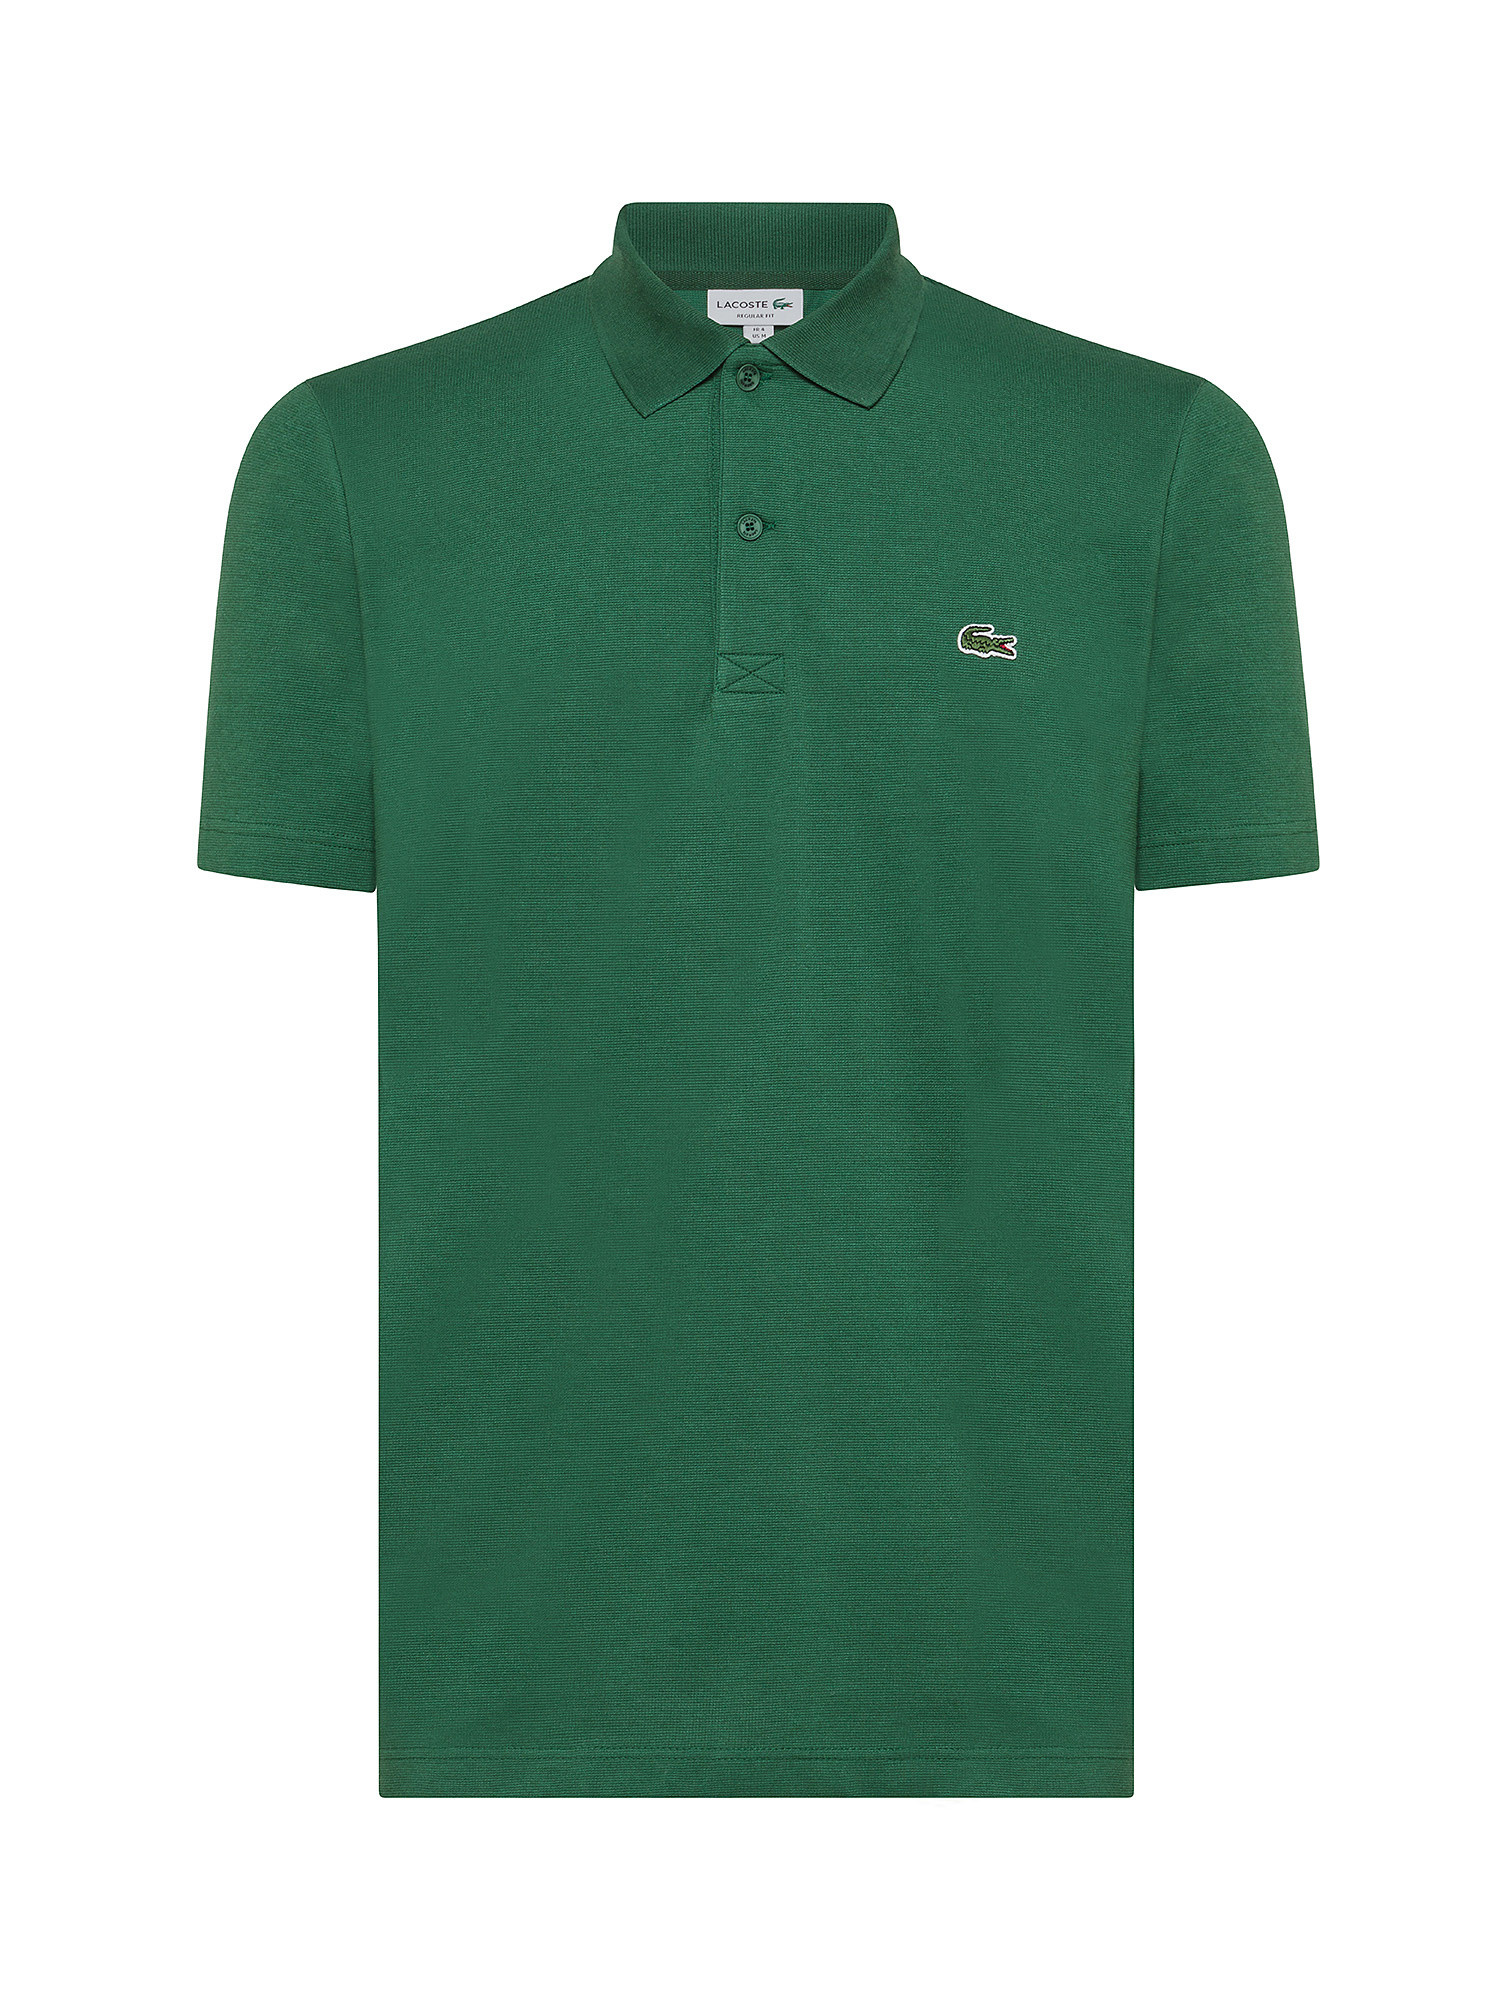 Lacoste - Regular fit stretch polo, Green, large image number 0